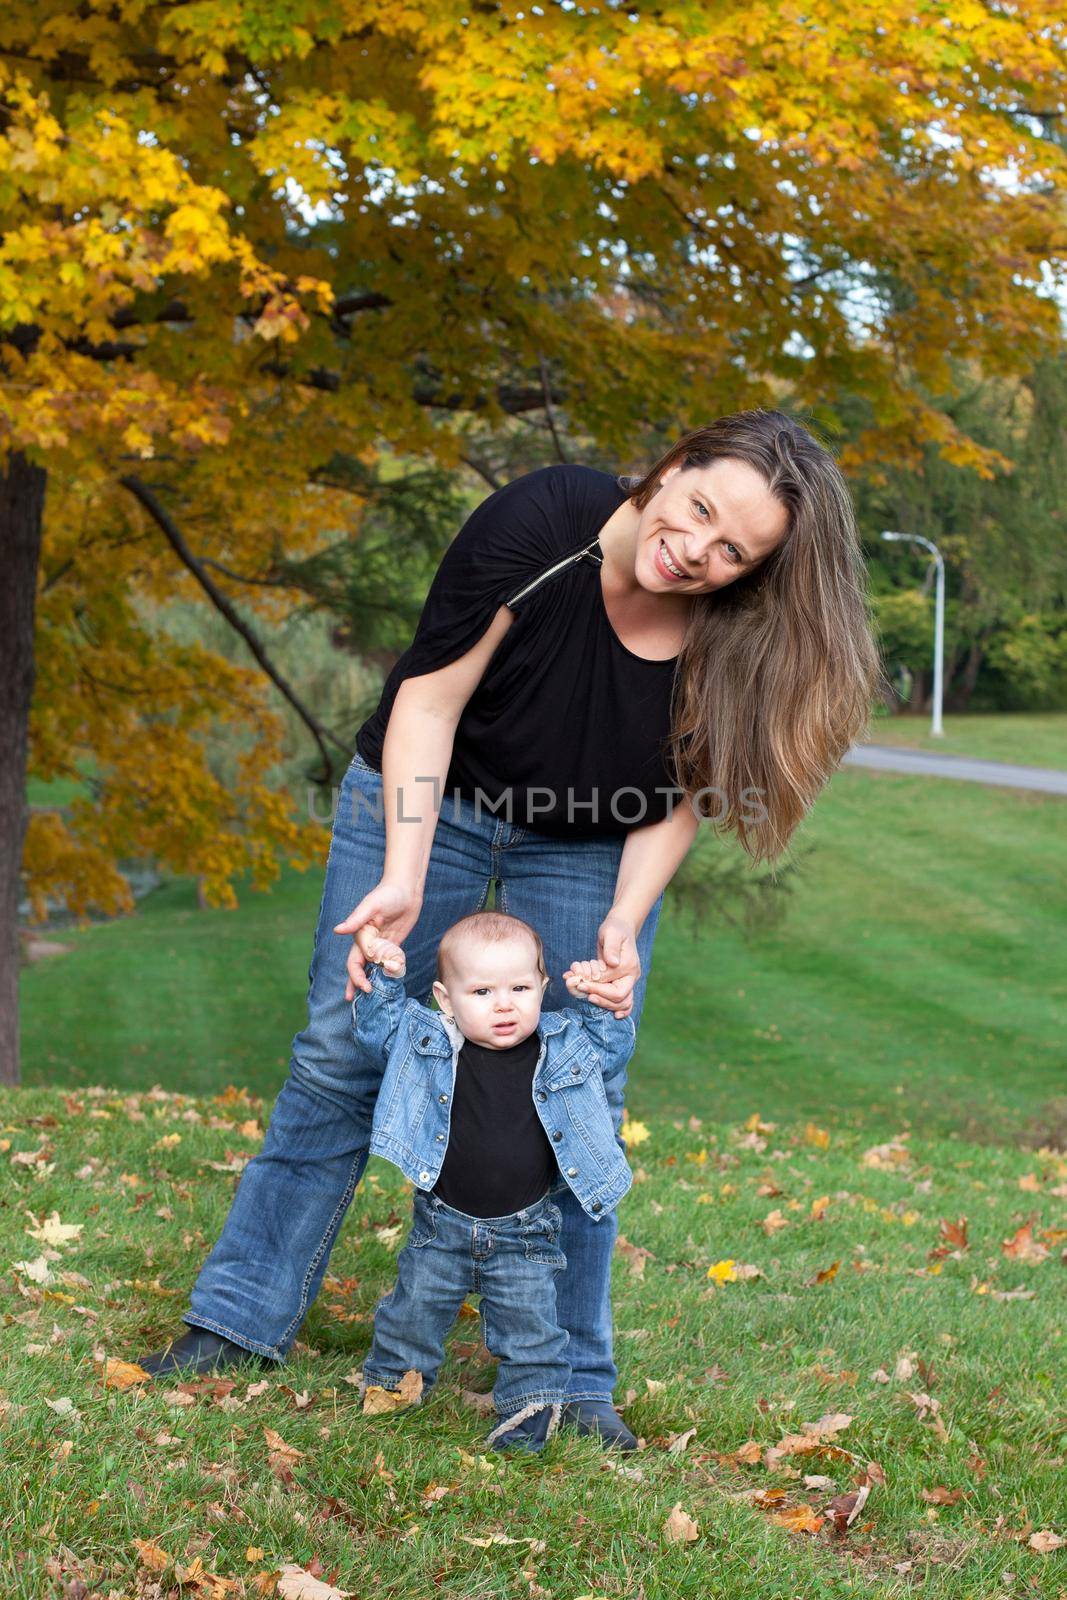 Portrait of mother and baby daughter in the park beside trees with Autumn leaves. The mother is holding baby's hands teaching her to walk.  